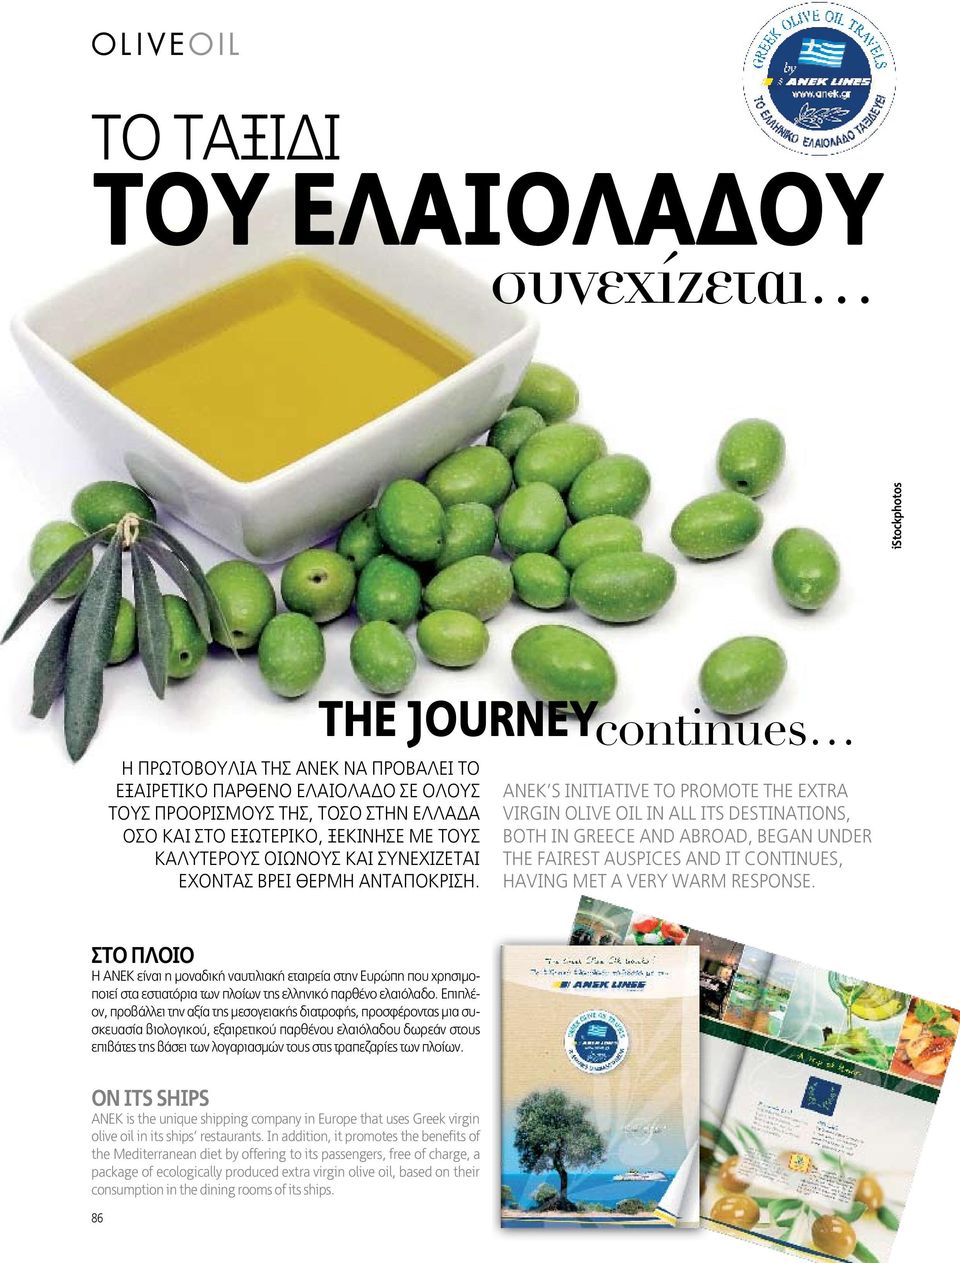 The journeycontinues ΑΝΕΚ s initiative to promote the extra virgin olive oil in all its destinations, both in Greece and abroad, began under the fairest auspices and it continues, having met a very